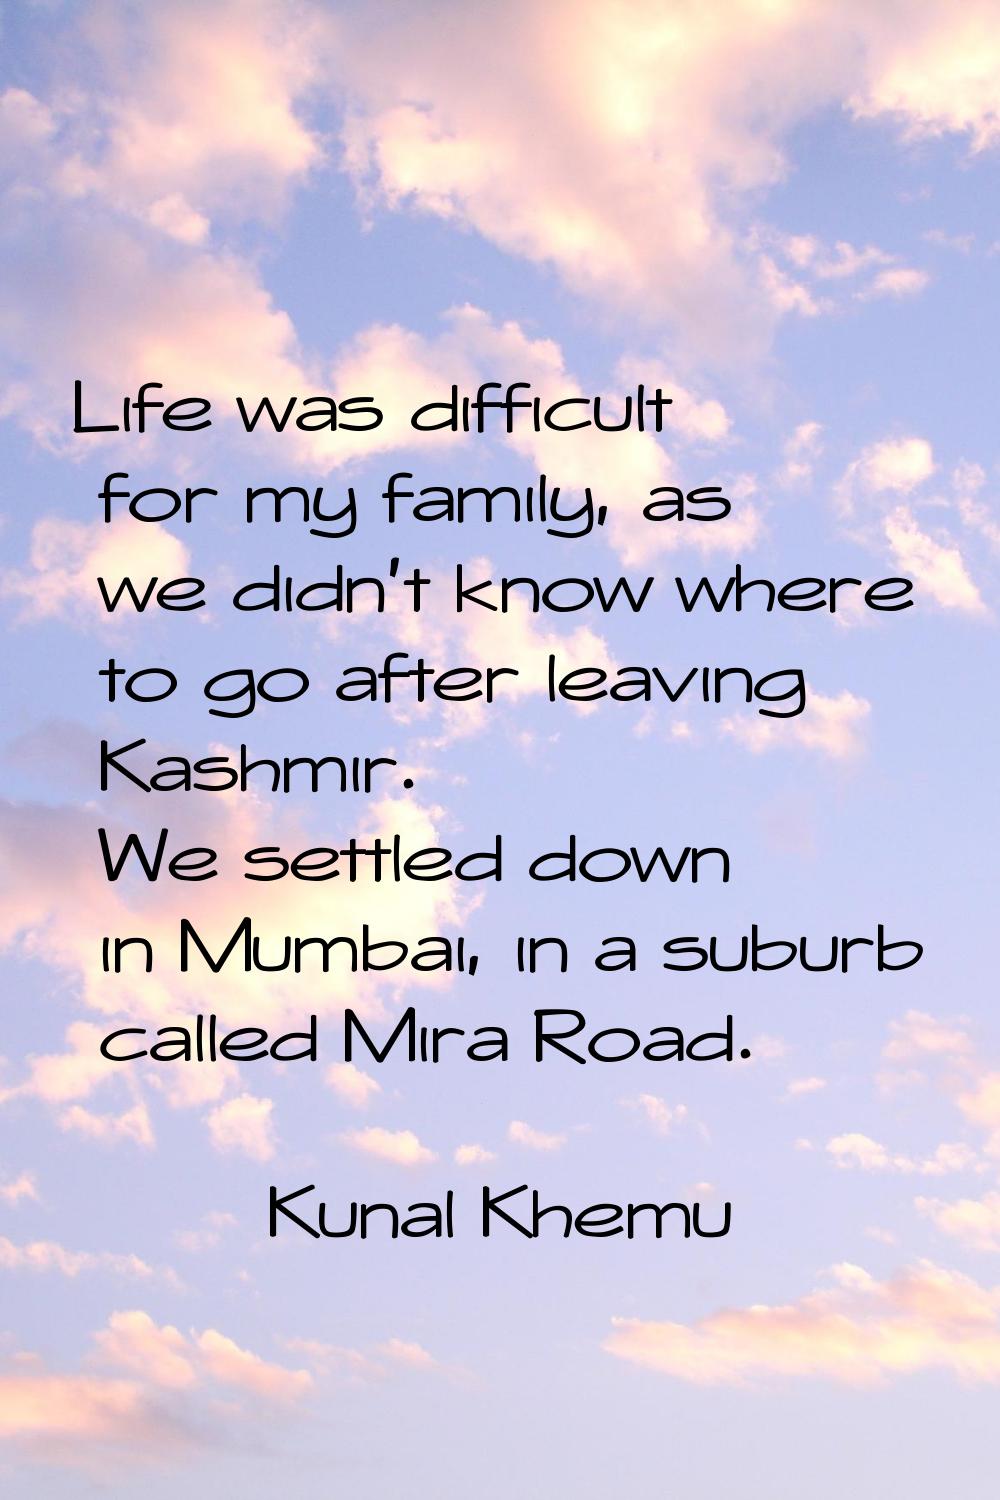 Life was difficult for my family, as we didn't know where to go after leaving Kashmir. We settled d